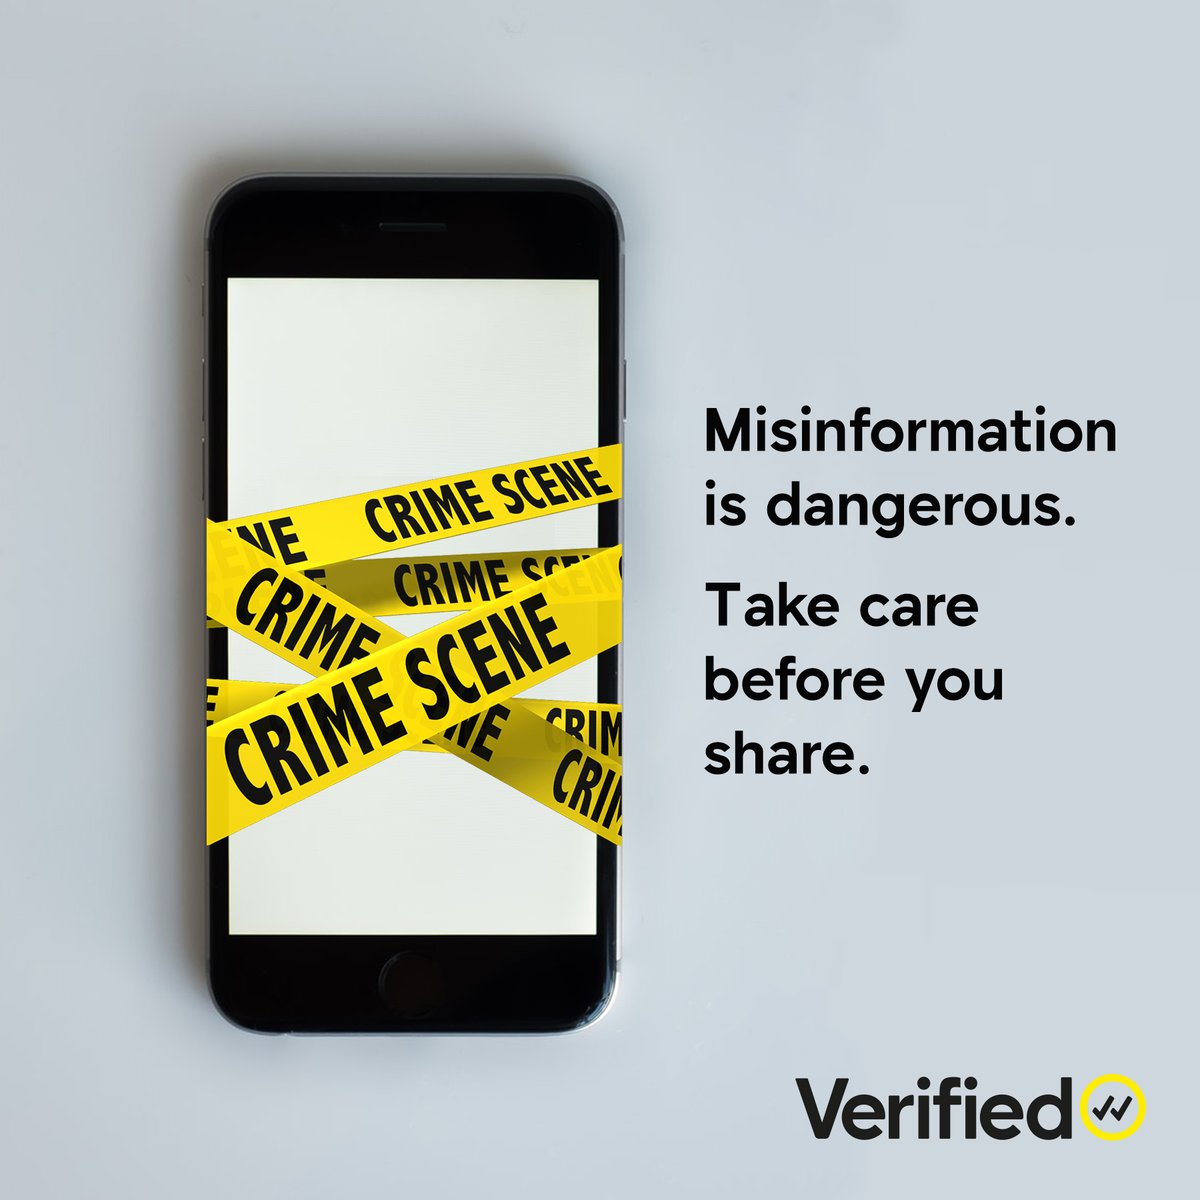 The spread of misinformation during a crisis like #COVID19 can result in people being left uninformed, unprotected and vulnerable.

❌ Don't share rumors.
✅ Choose content verified by reliable sources.

#PledgetoPause before sharing online. pledgetopause.org